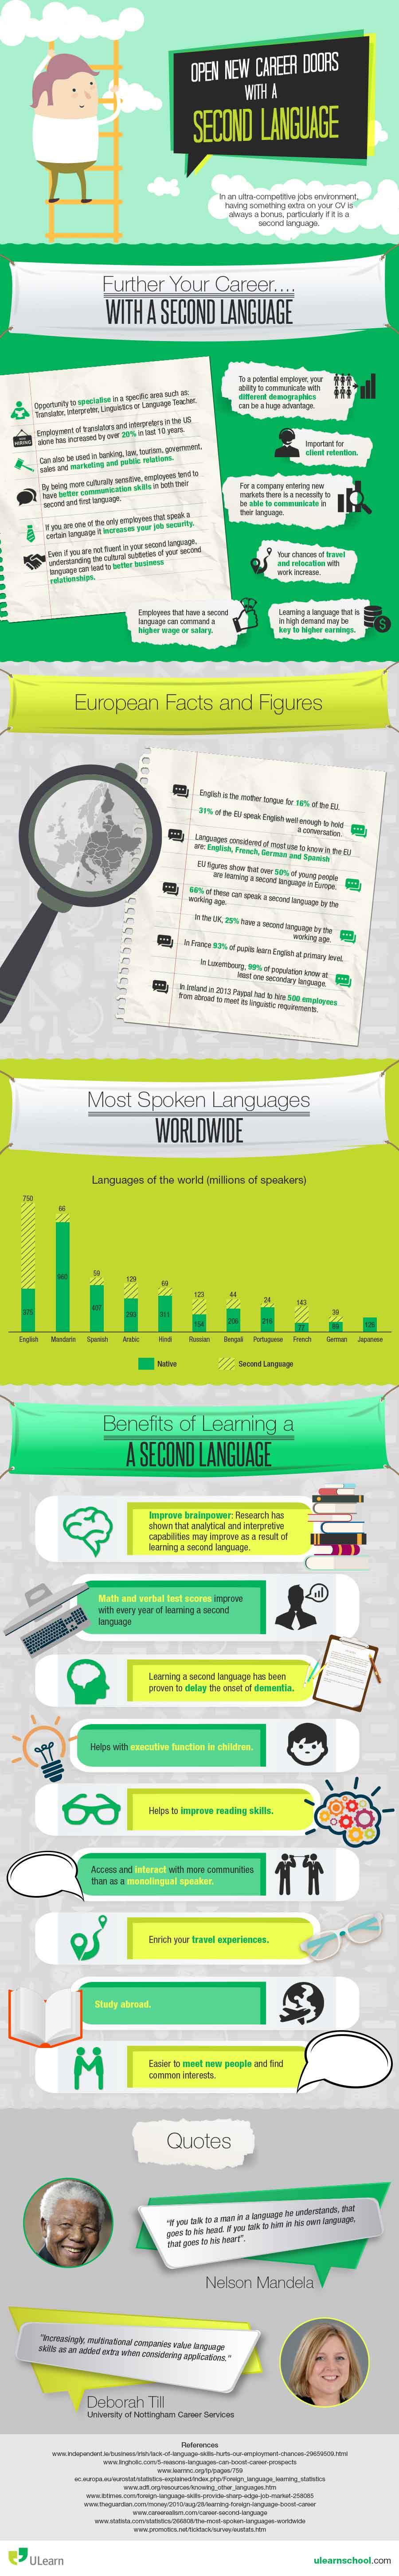 Infographic describing how a second language can help boots your career options.